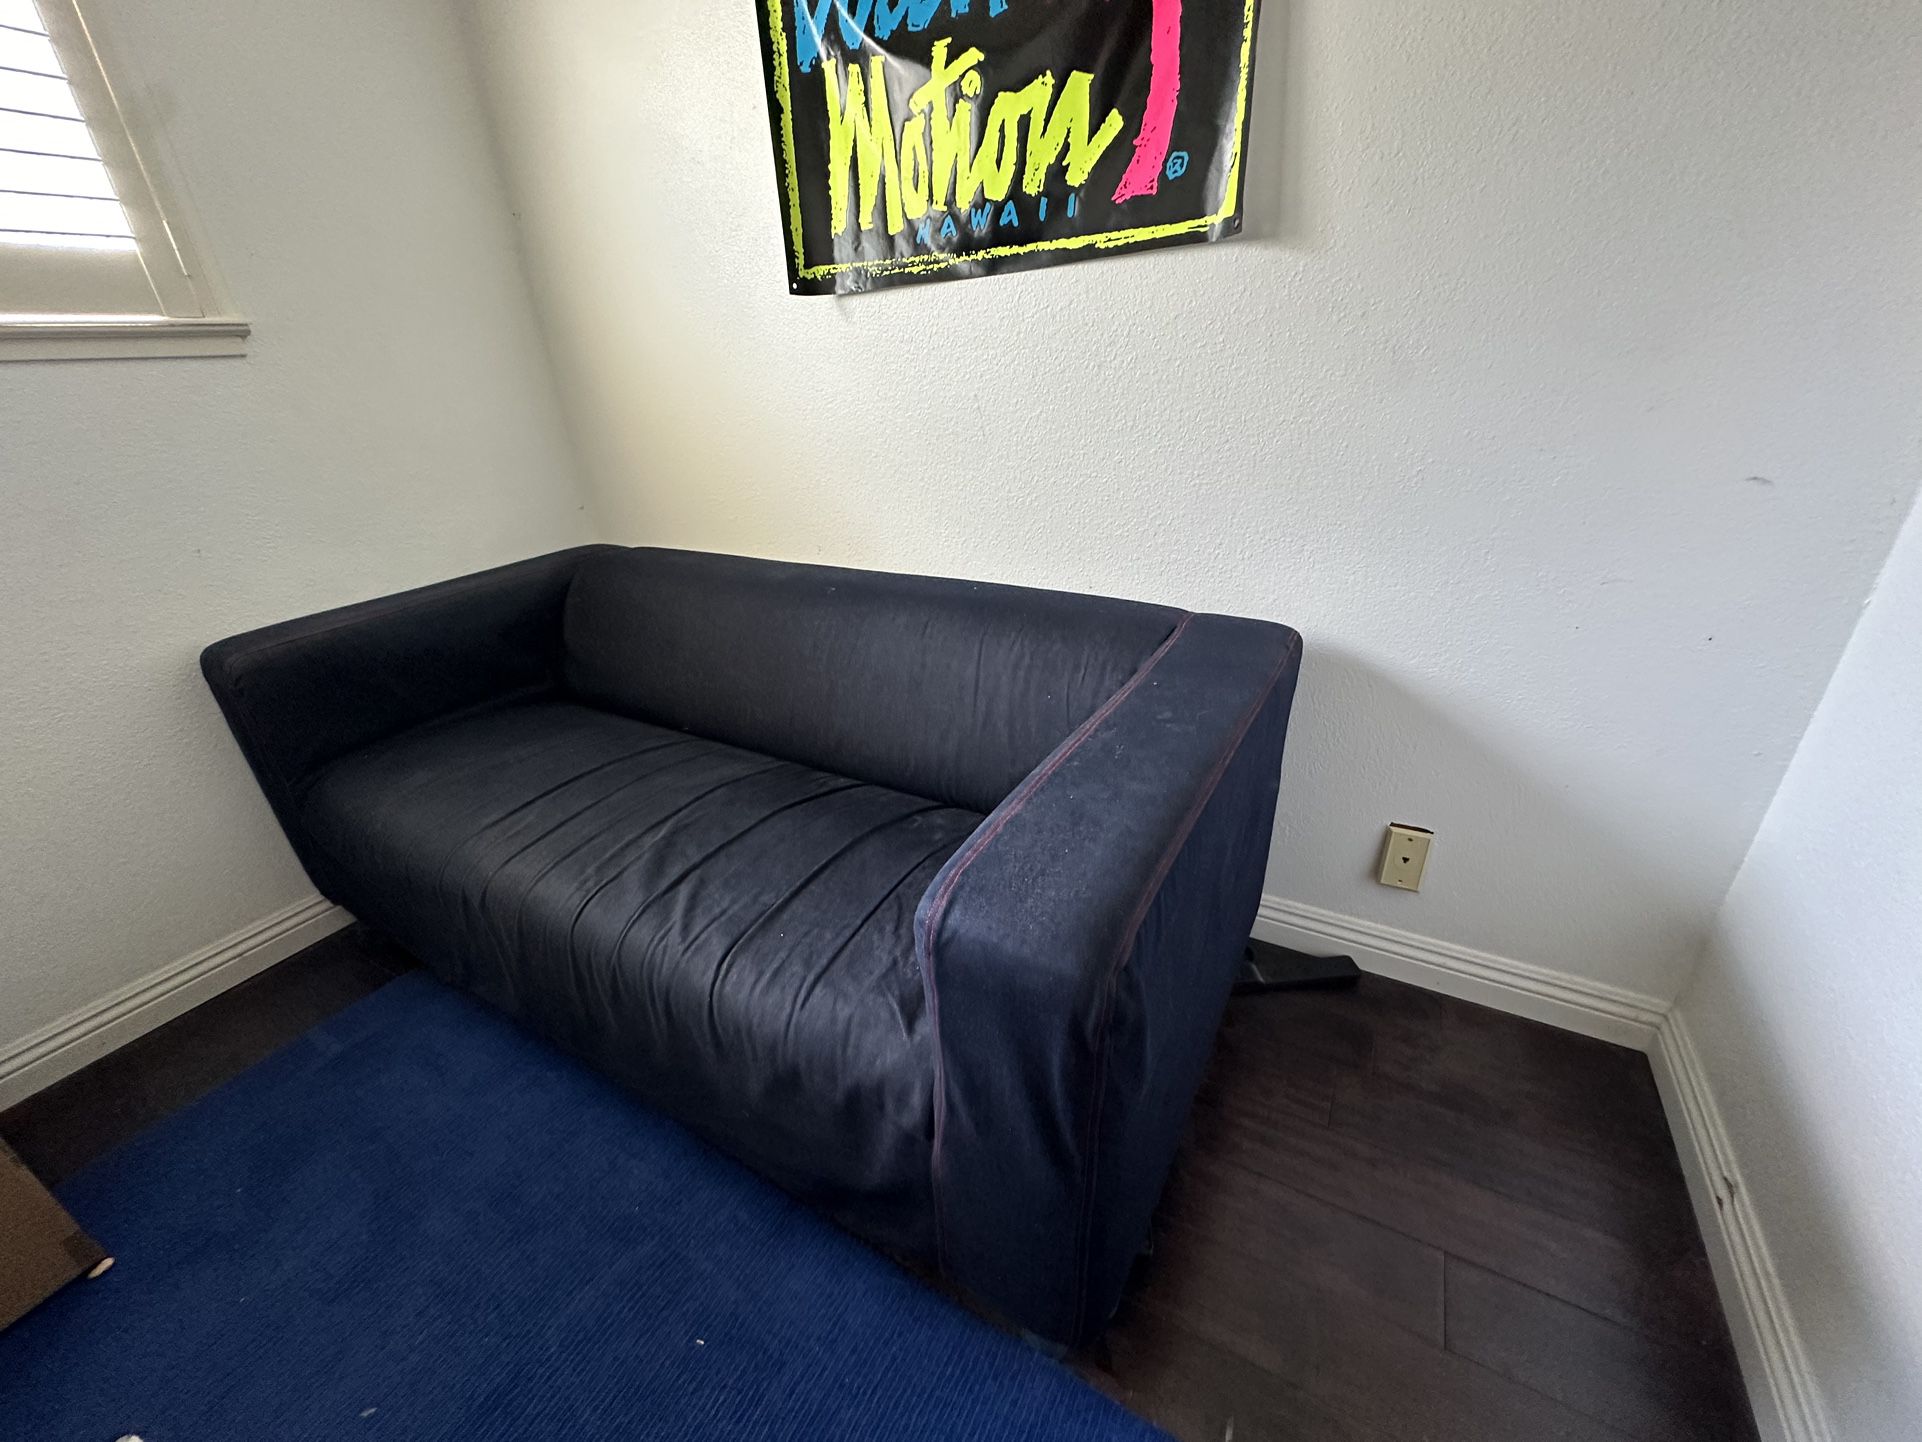 Small IKEA Couch With Washable Denim Cover